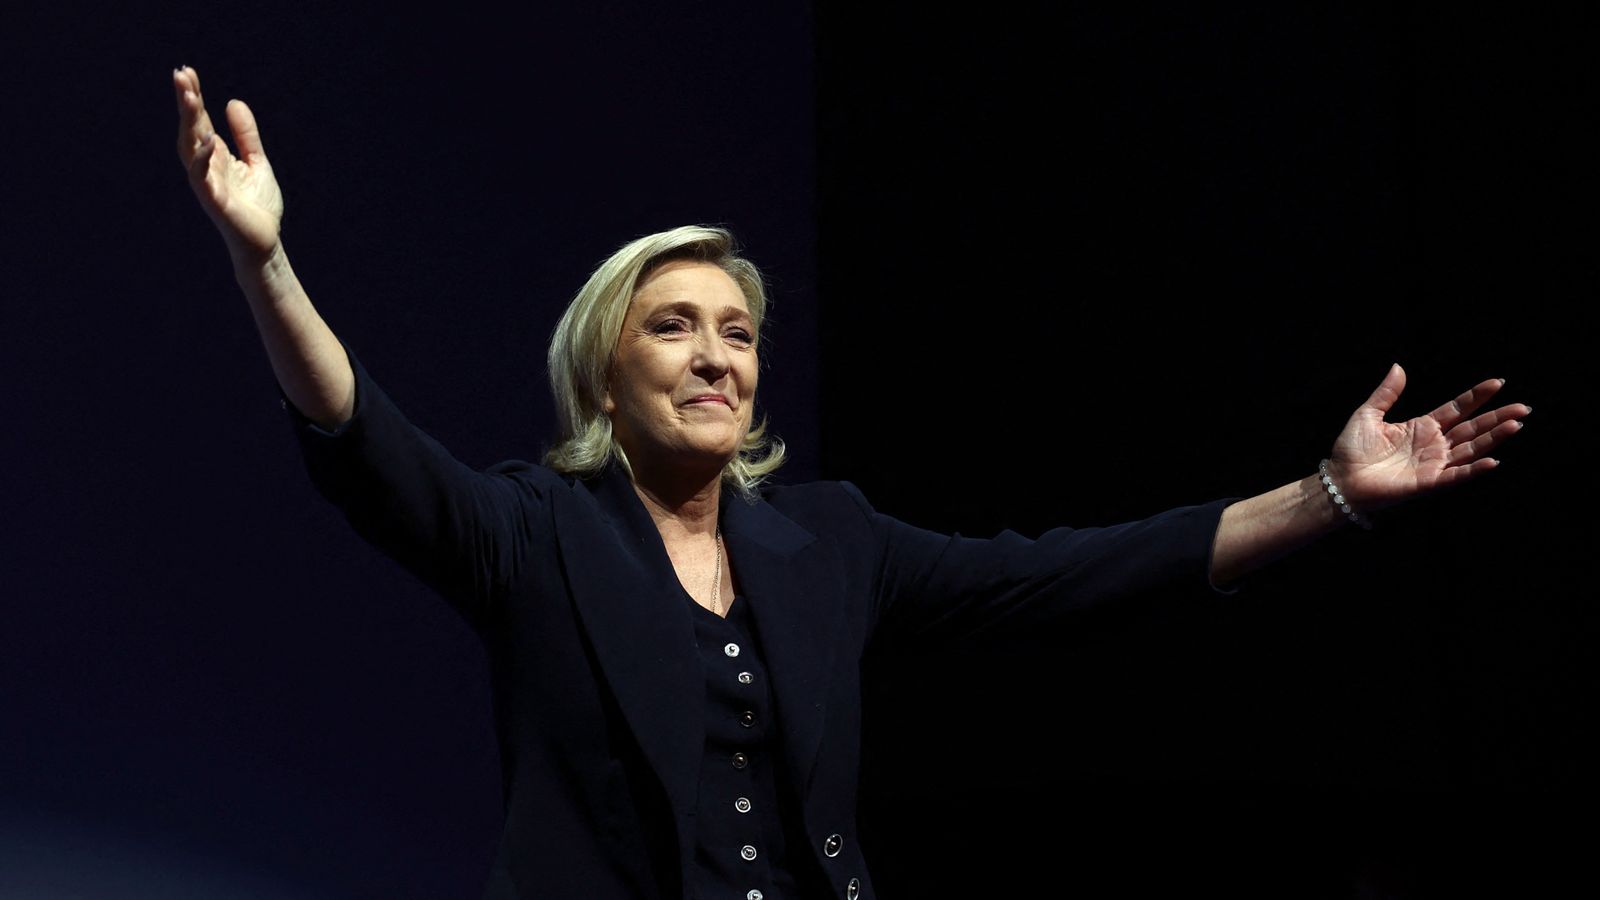 Marine Le Pen’s far-right National Rally party leads in first round of French election